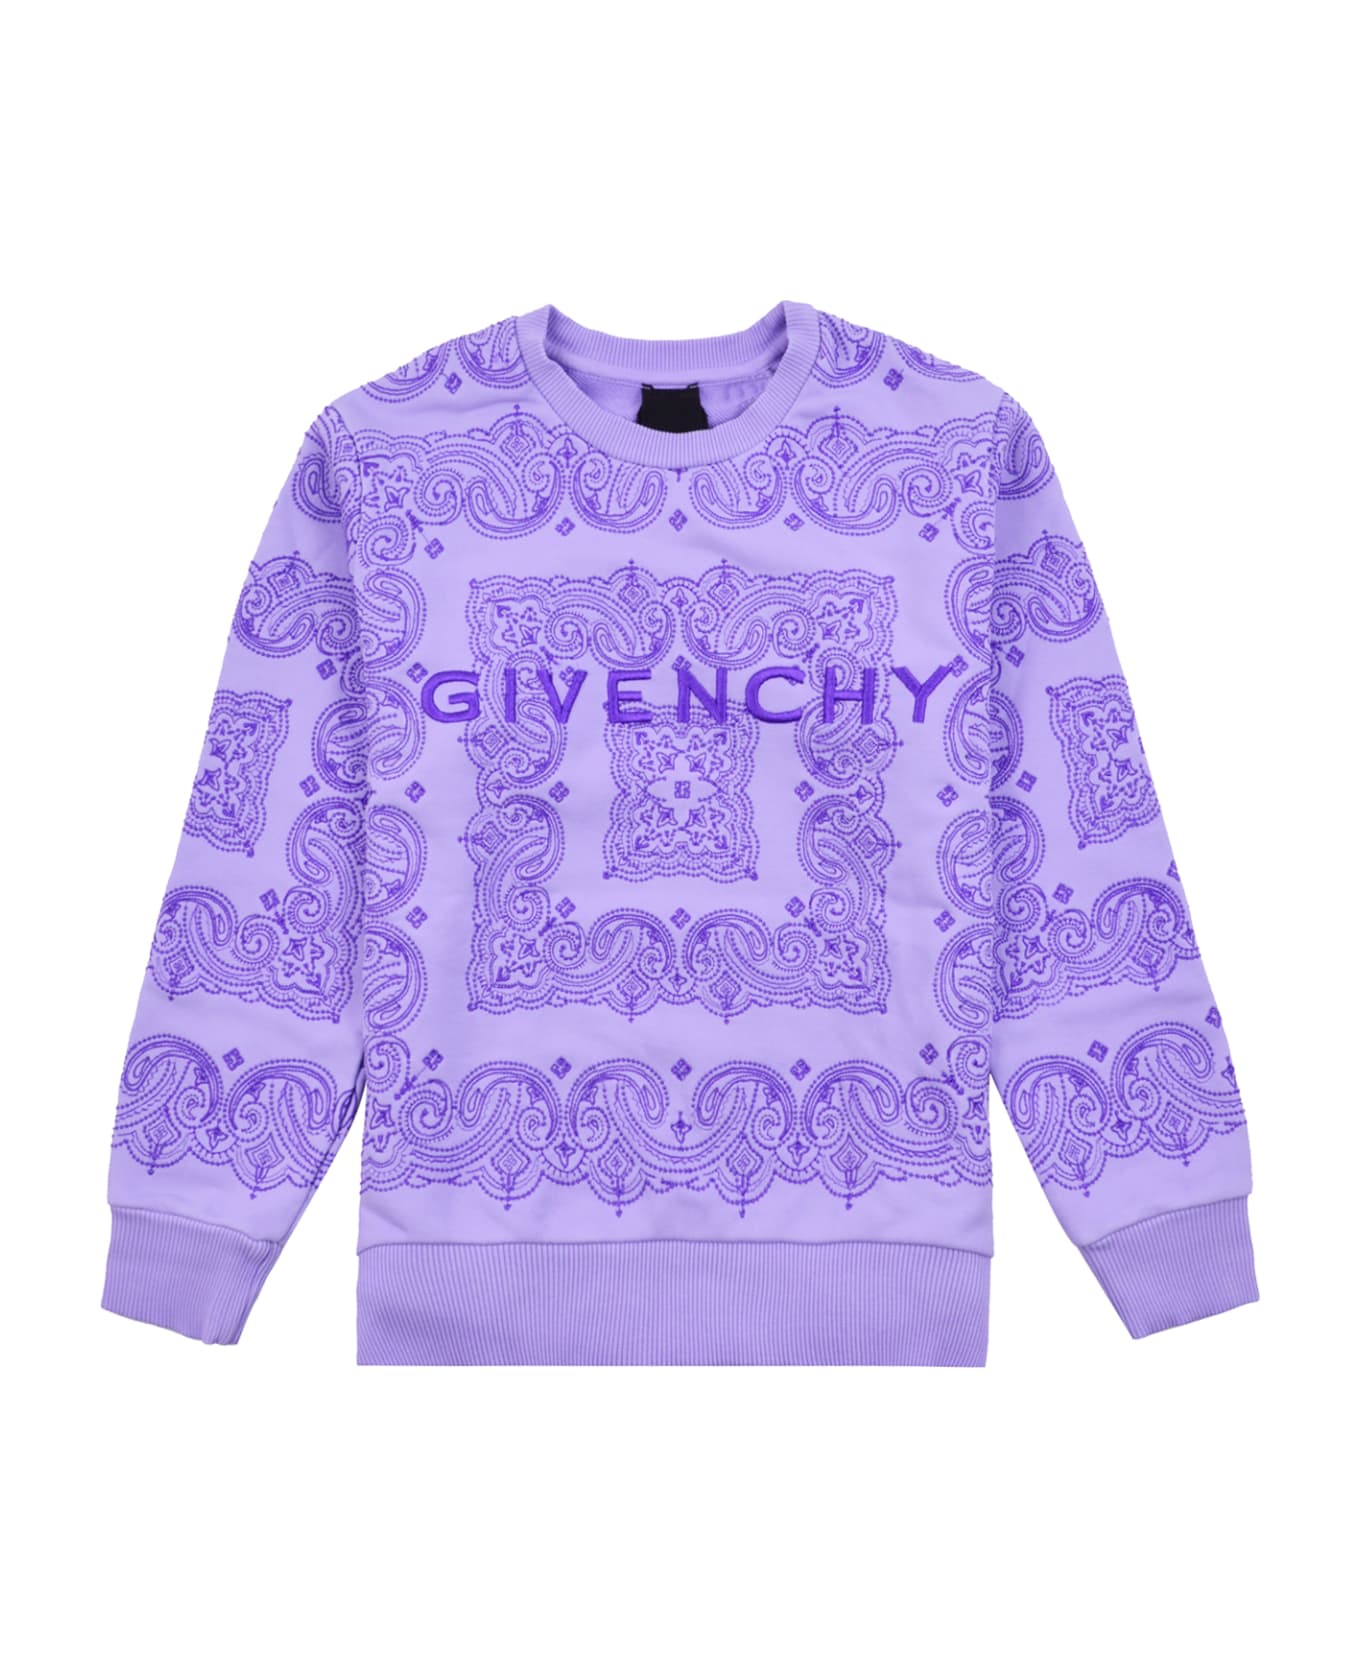 Givenchy Sweatshirt With Bandana Embroidery - Violet